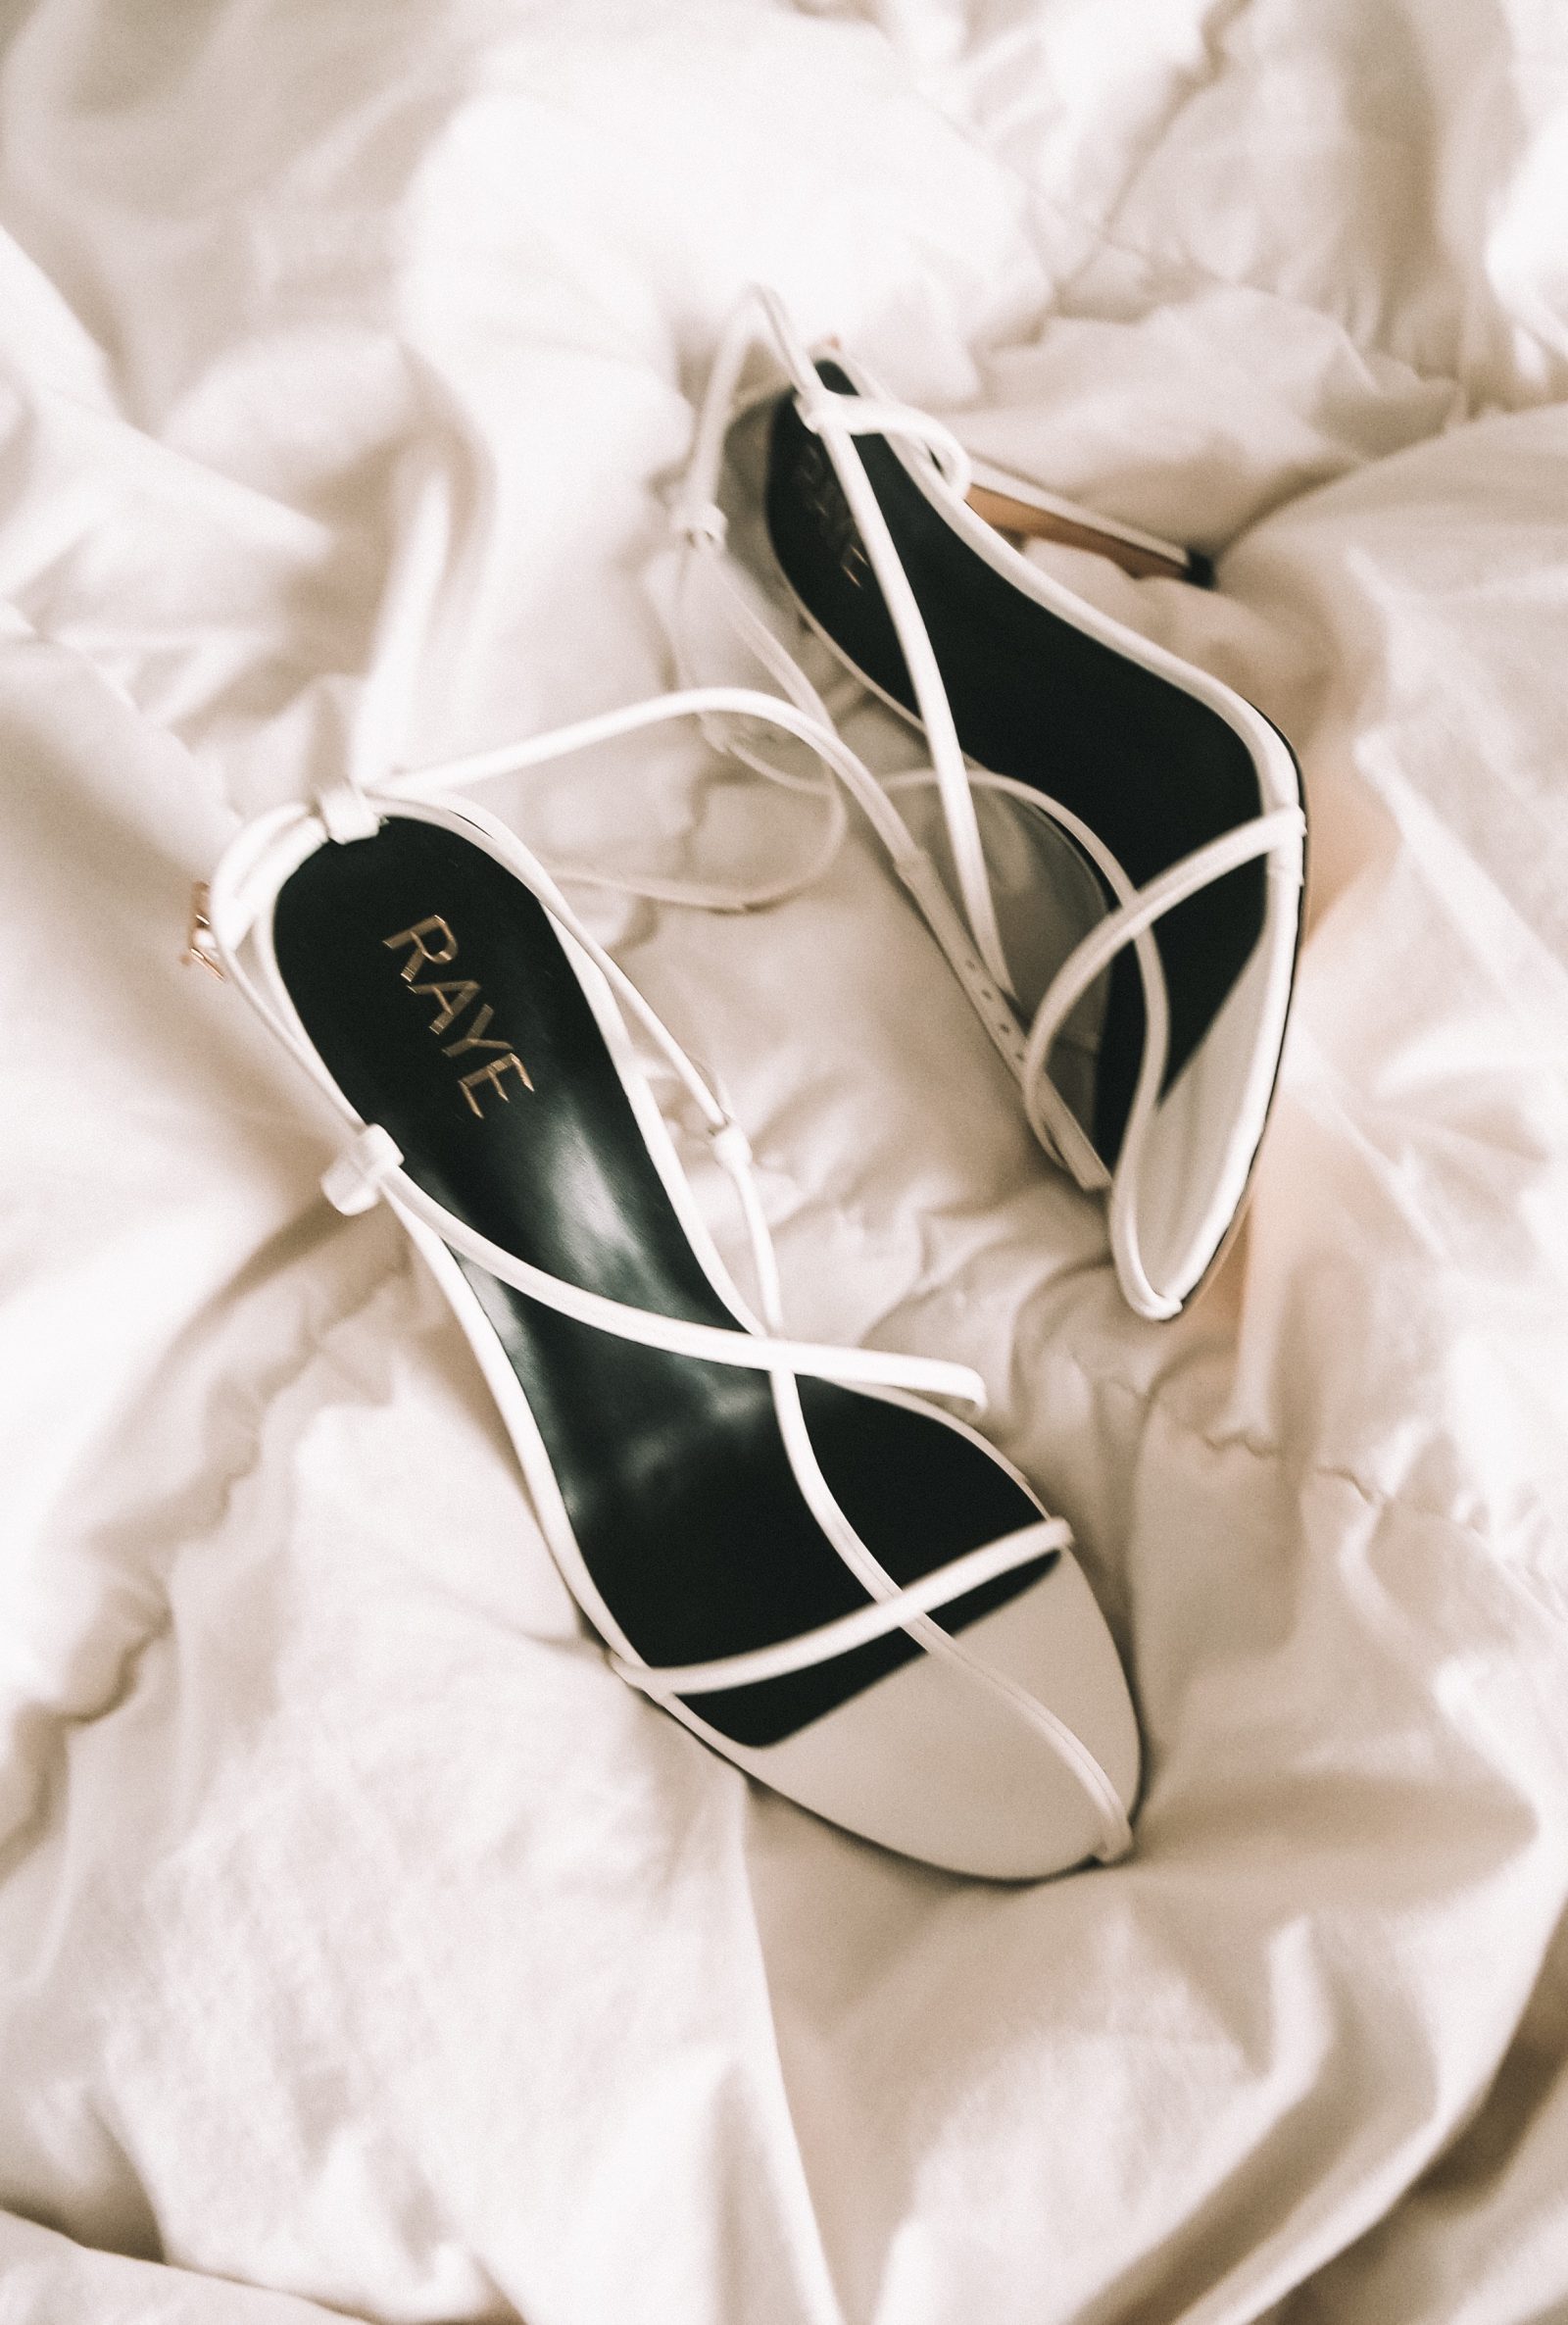 Revolve Cage Shoes - White - Fashion Blogger Sinead Crowe